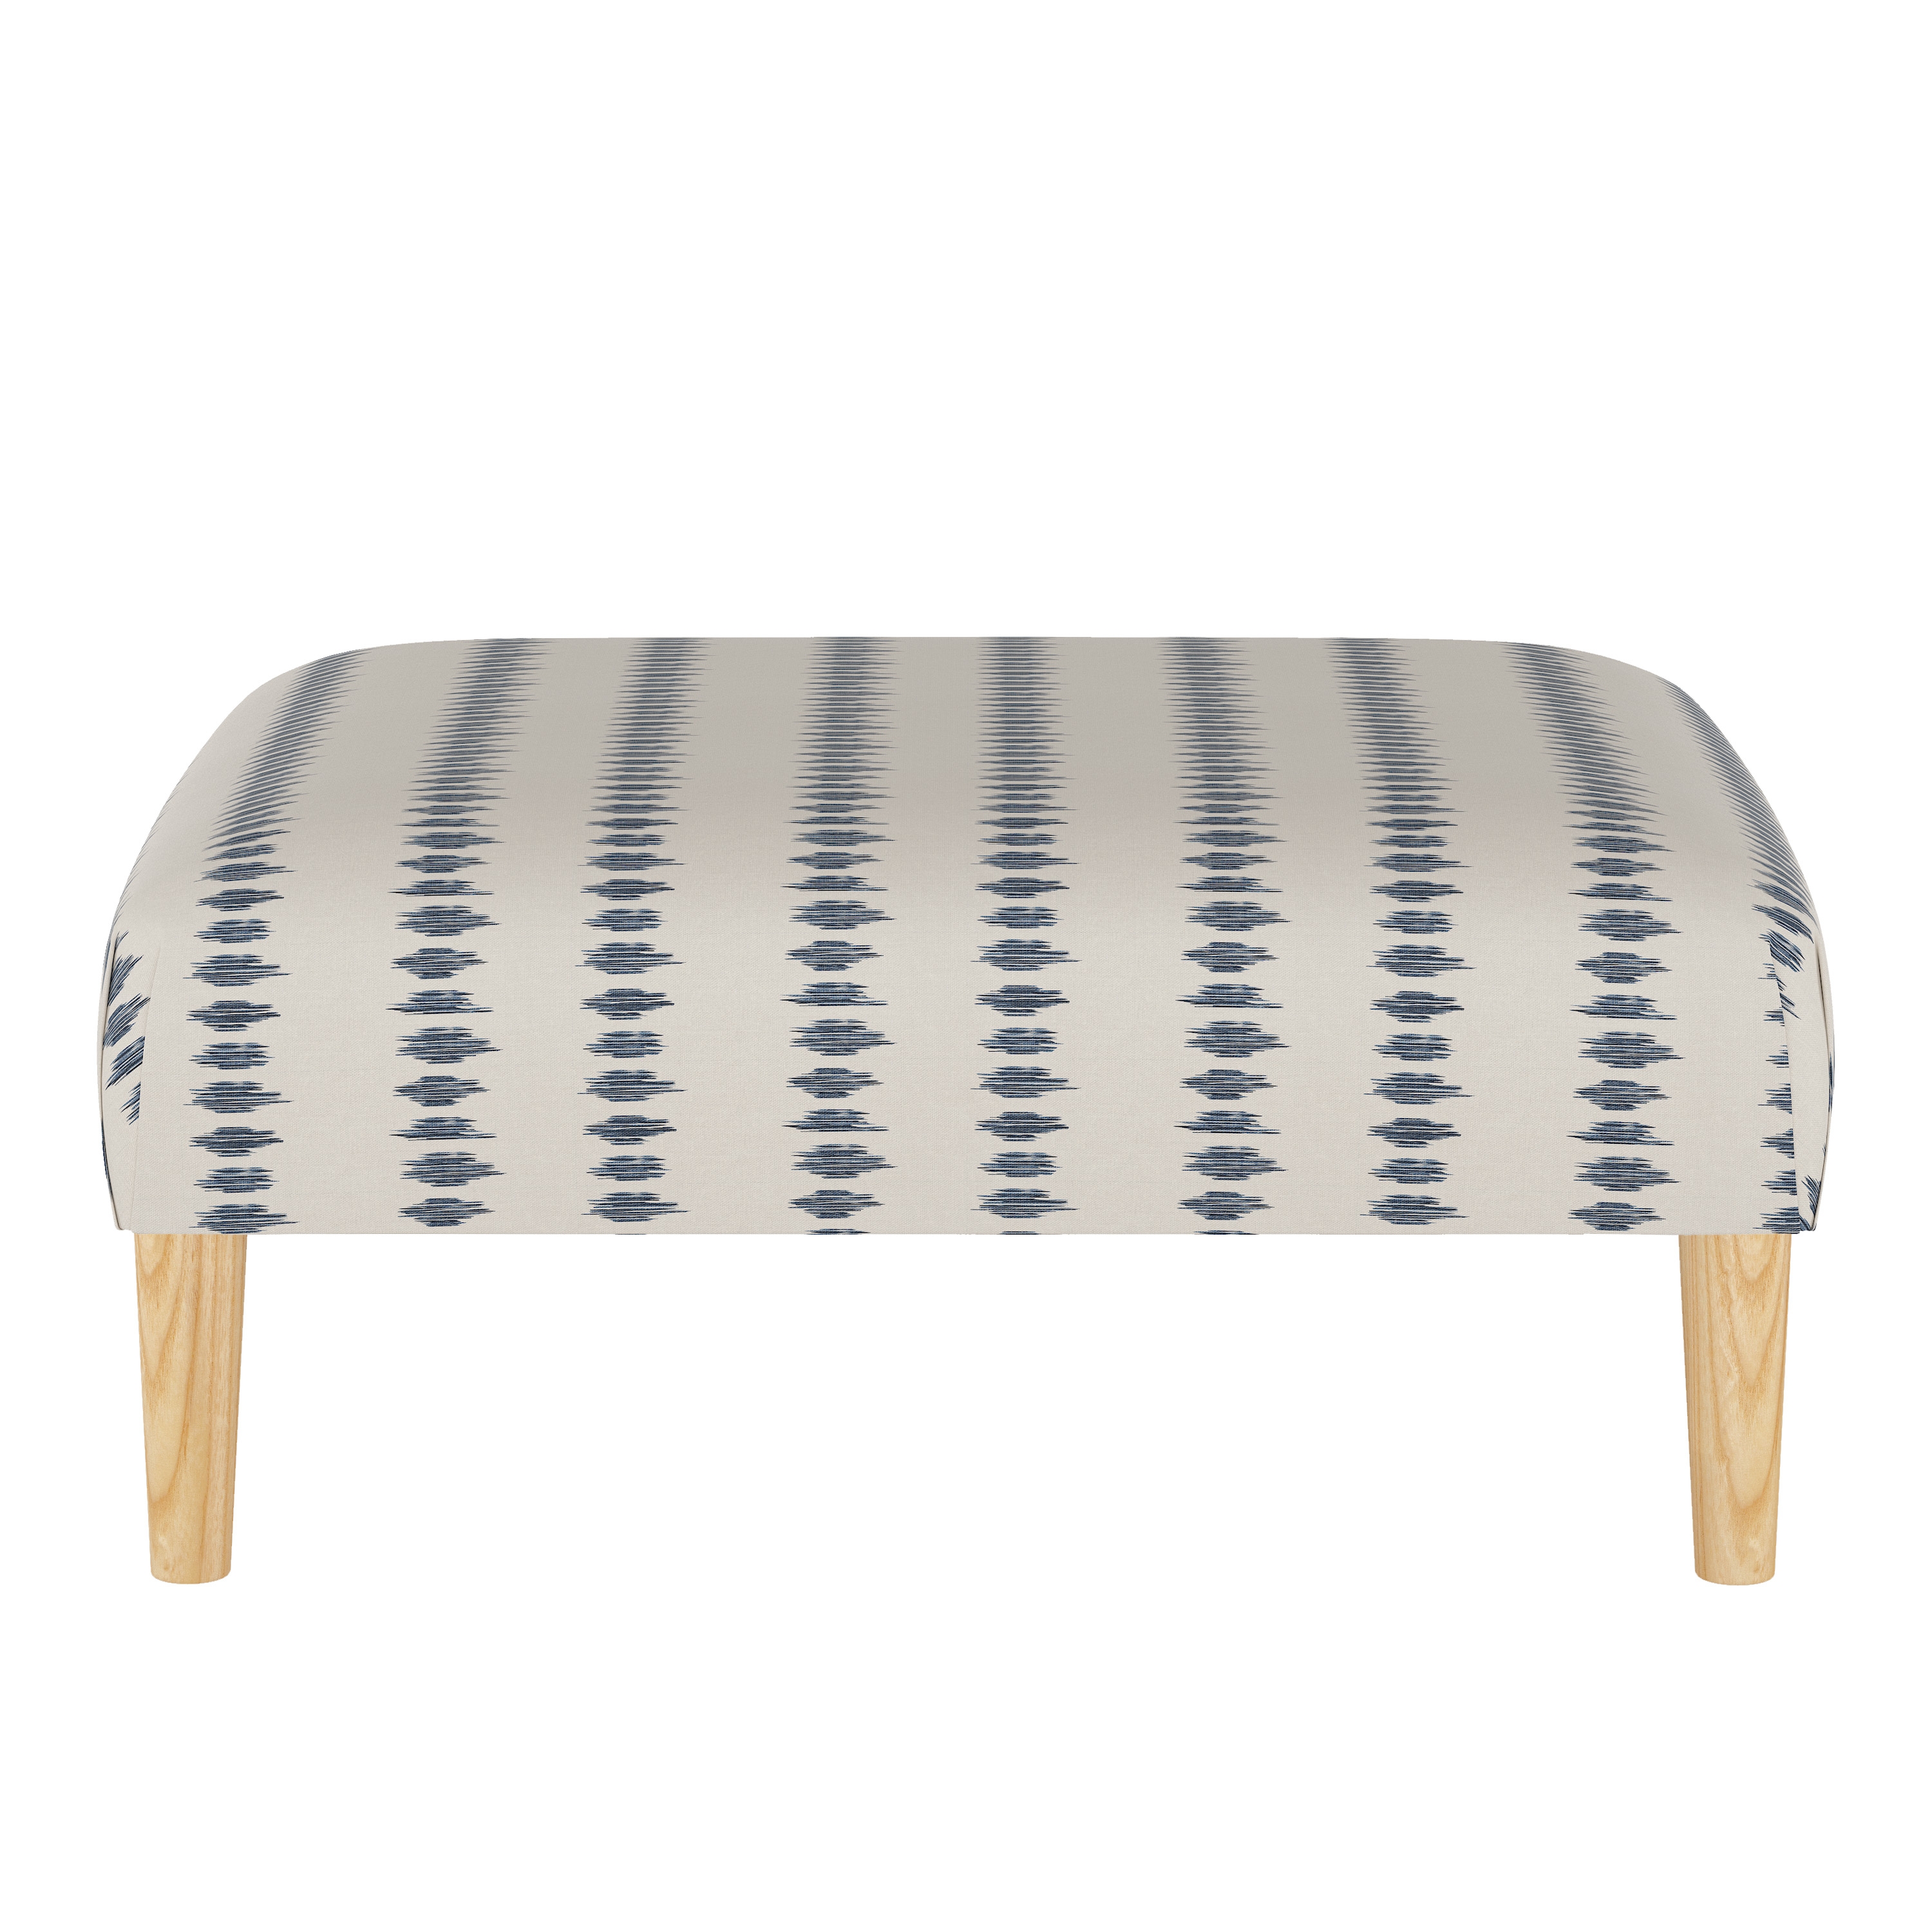 Algren Cocktail Ottoman with Cone Legs in Ikat Scribble Slate Oga - Image 1